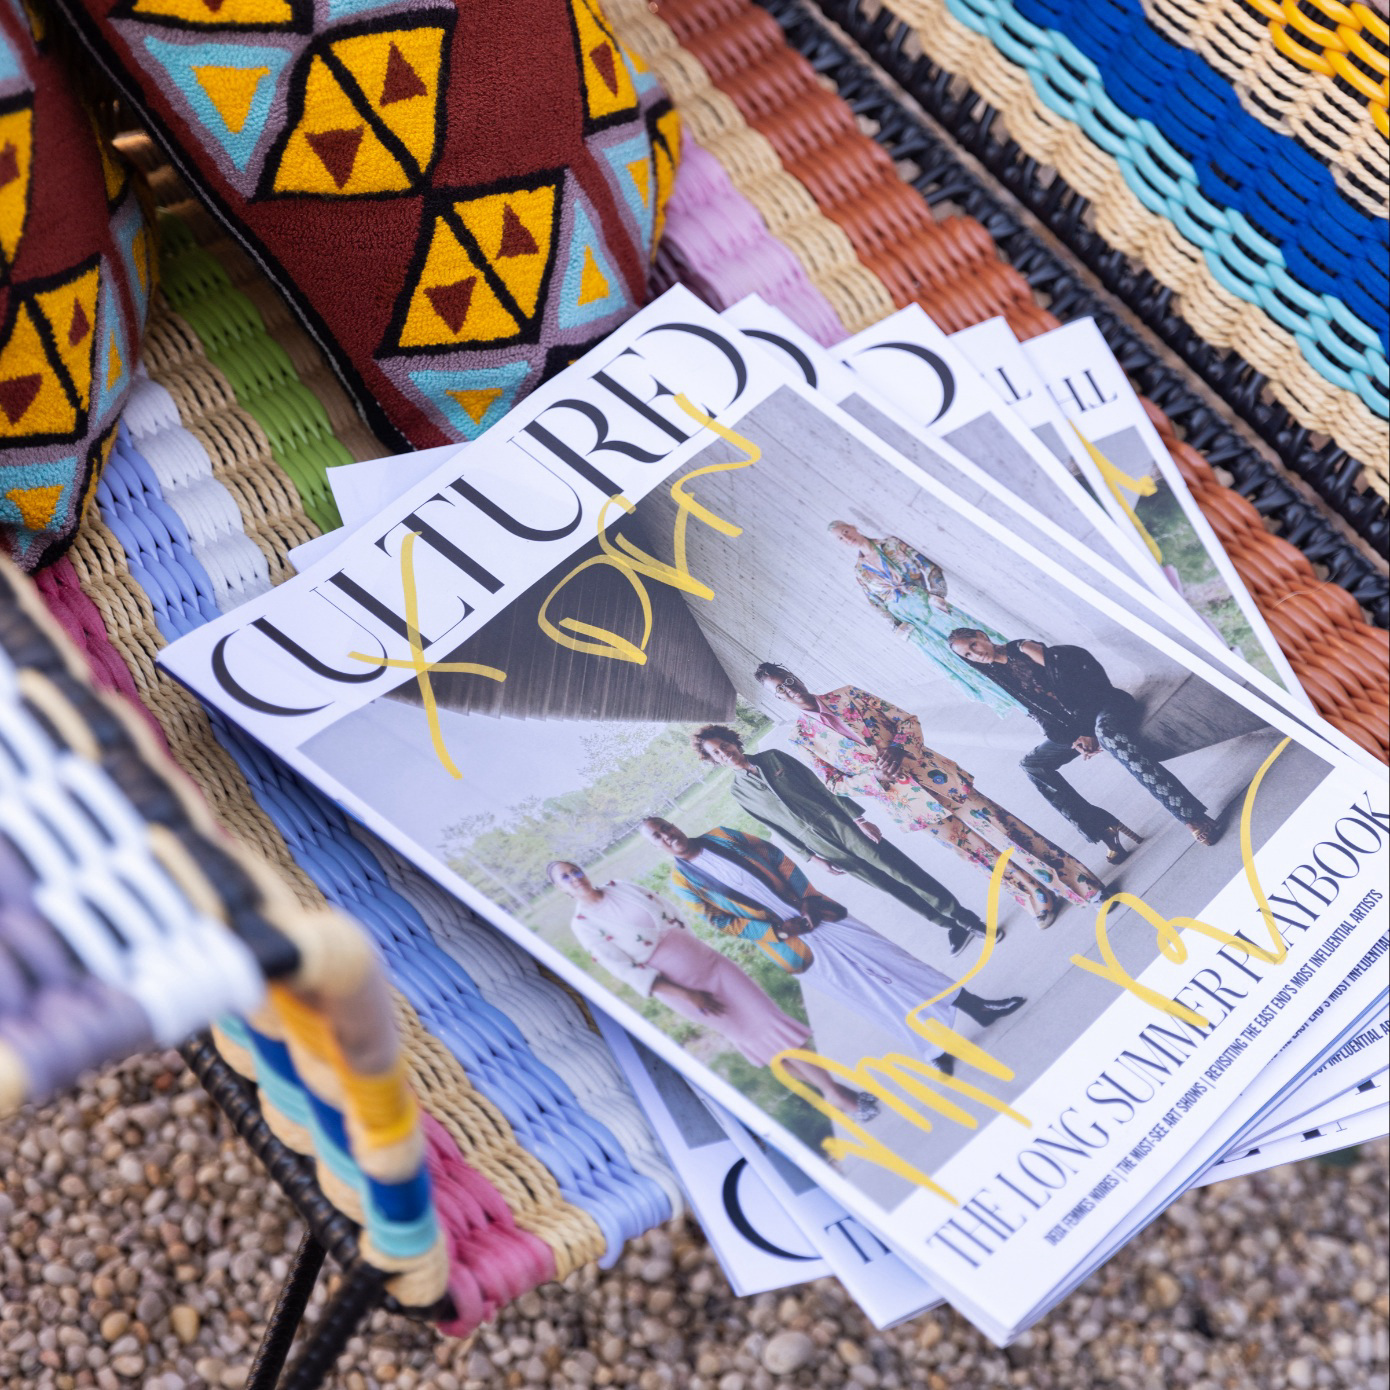 Stack of Cultured's Hamptons Edition Magazine